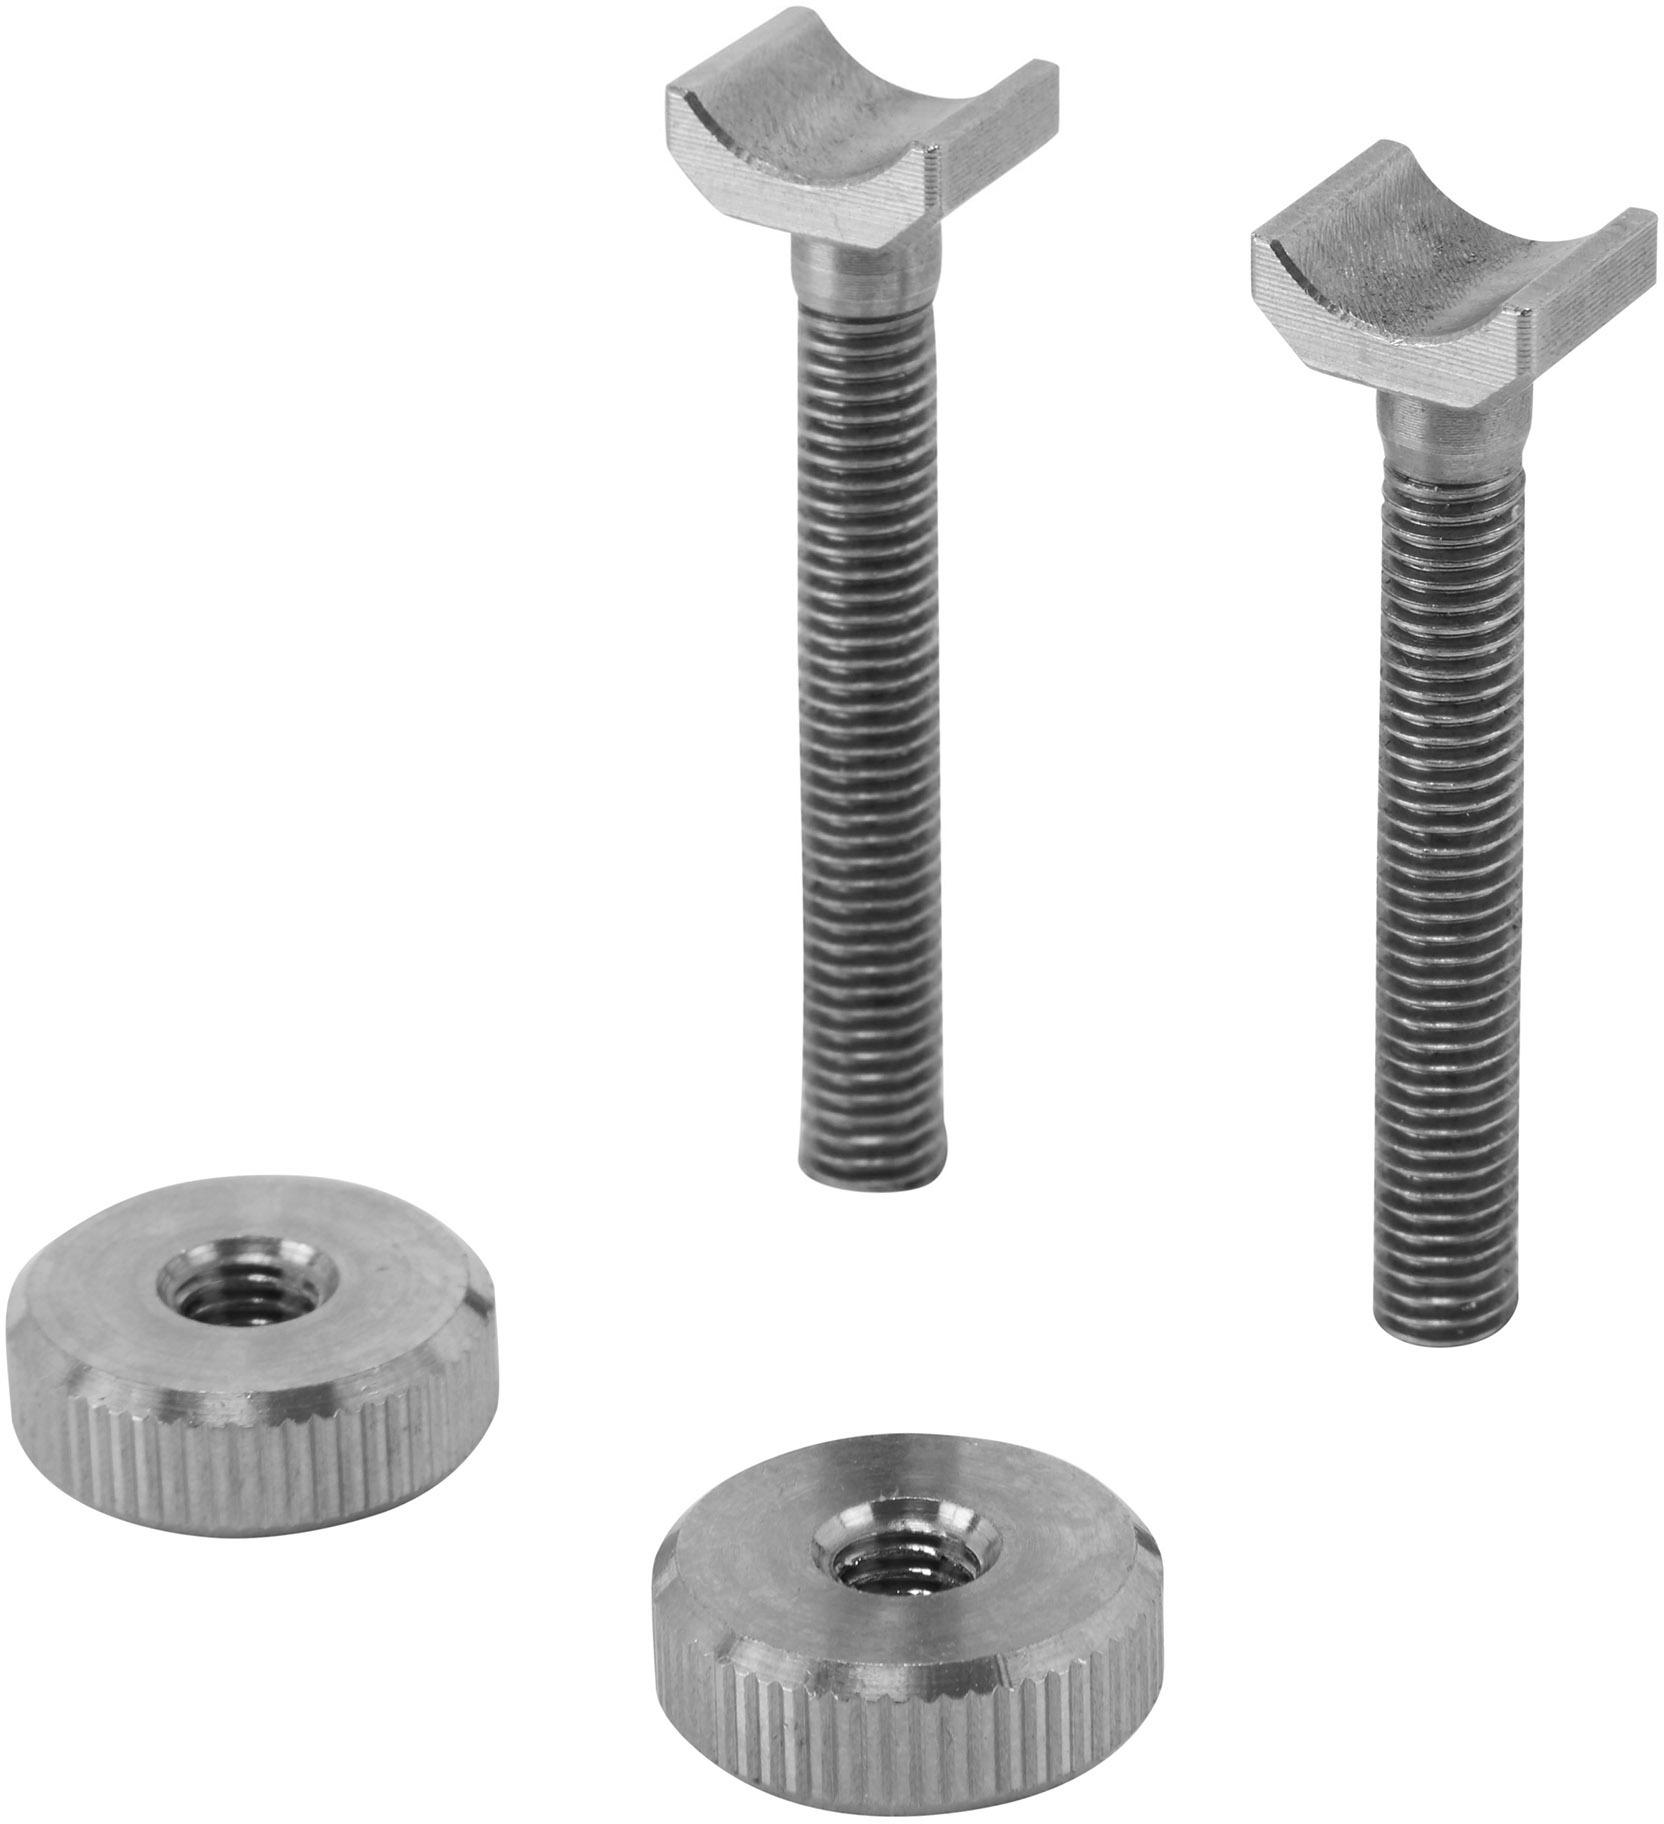 Nukeproof Solum 260 Chain Tensioner Kit - Silver